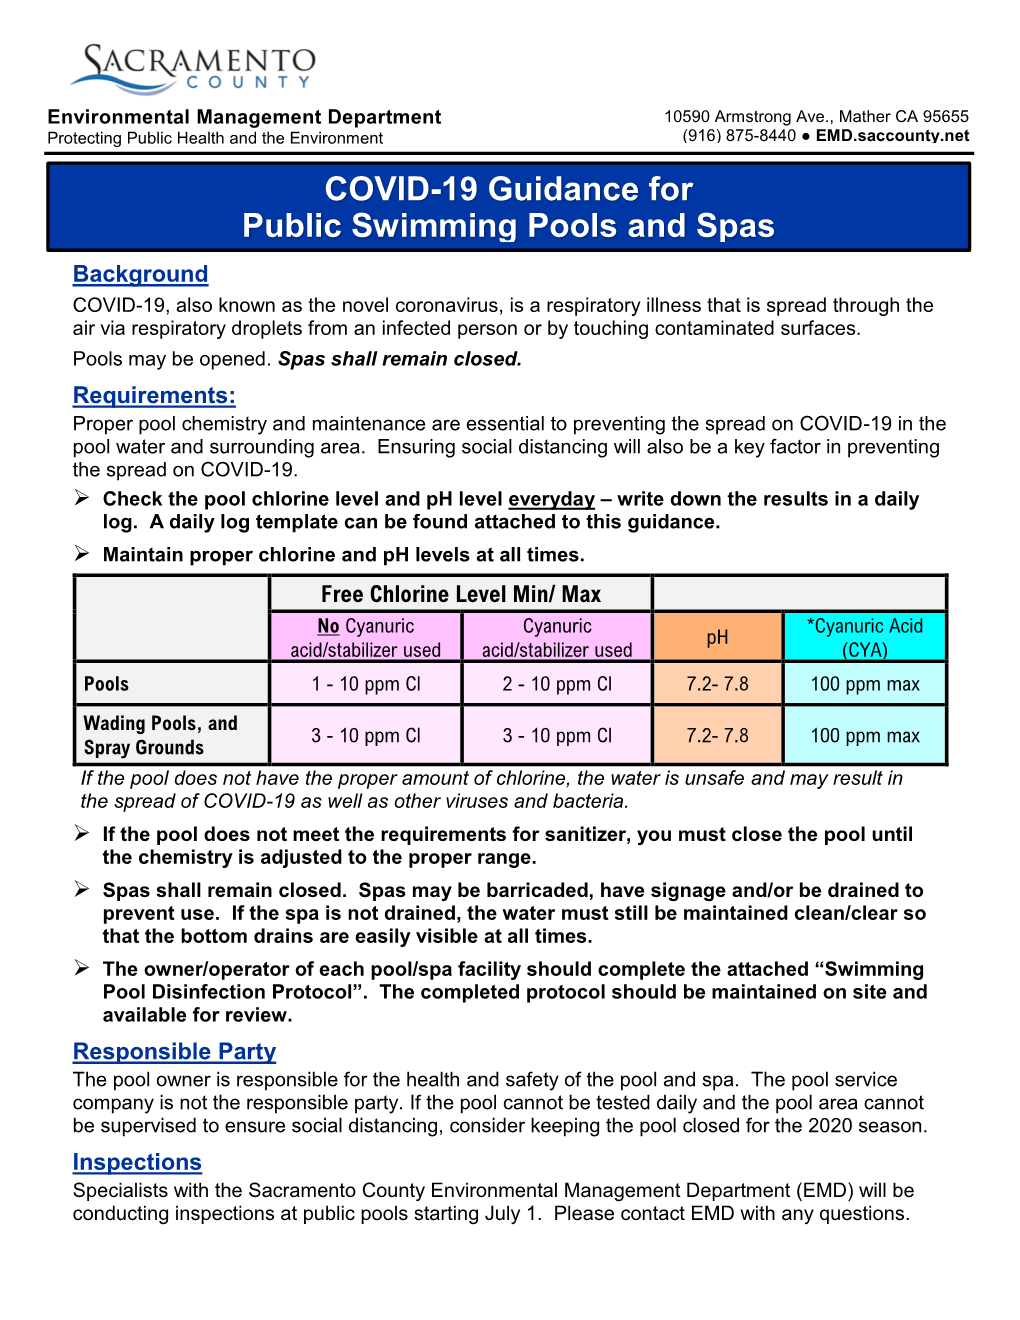 COVID-19 Guidance for Public Swimming Pools and Spas